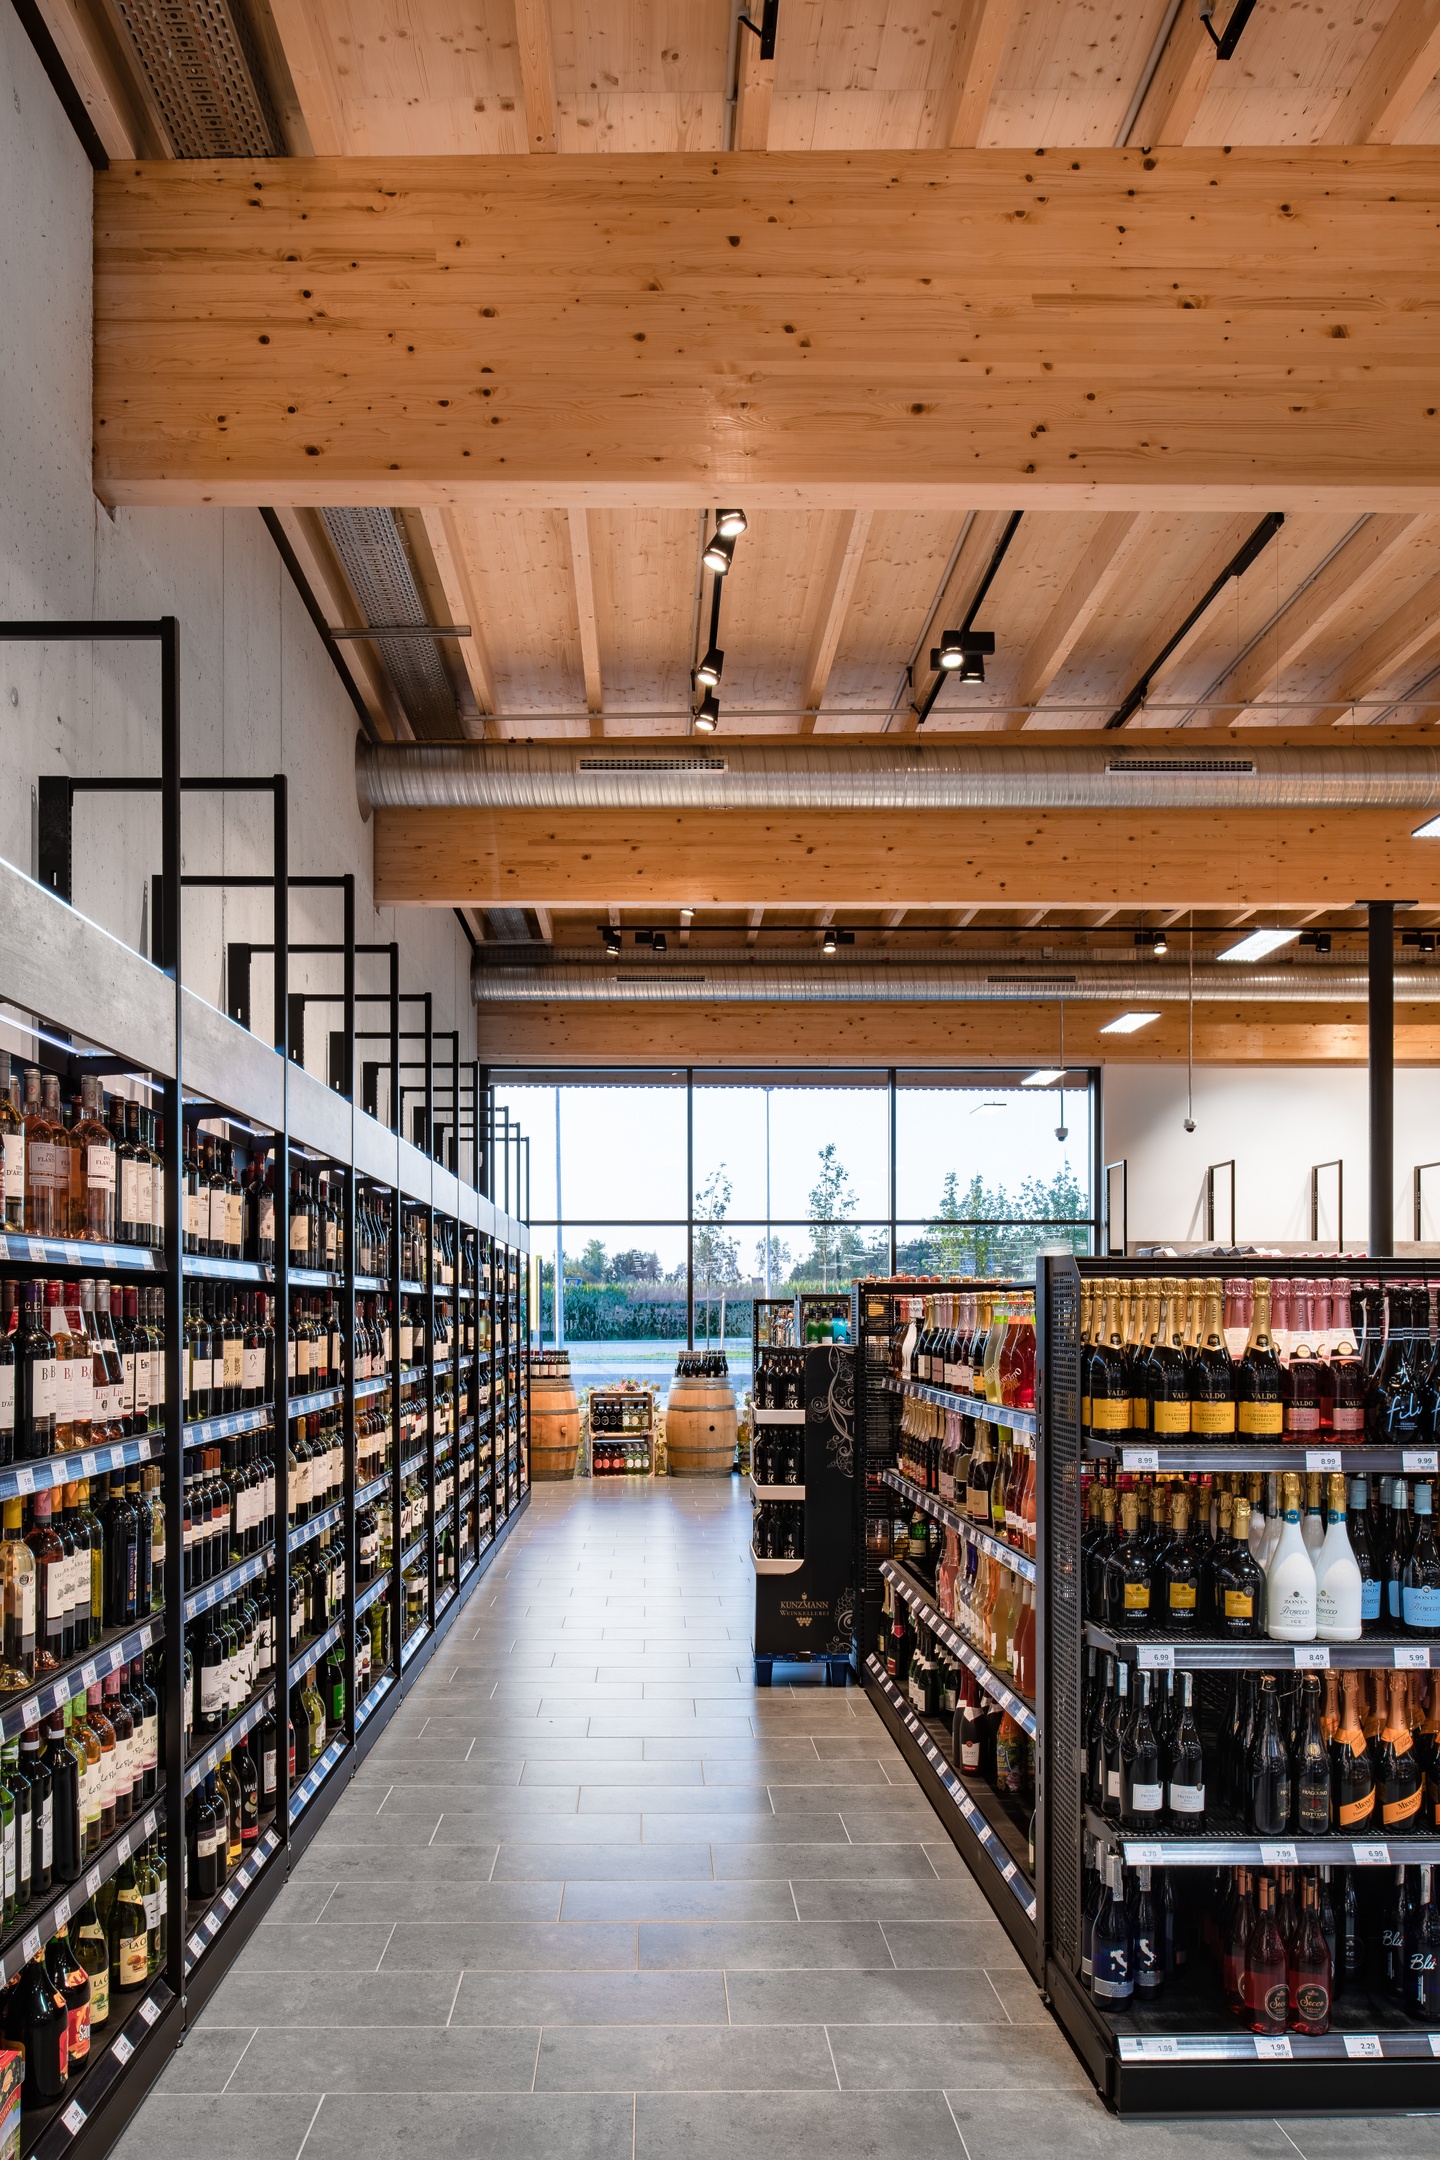 Interior of a supermarket with wooden roof beams and rustic wood and iron shelving units.